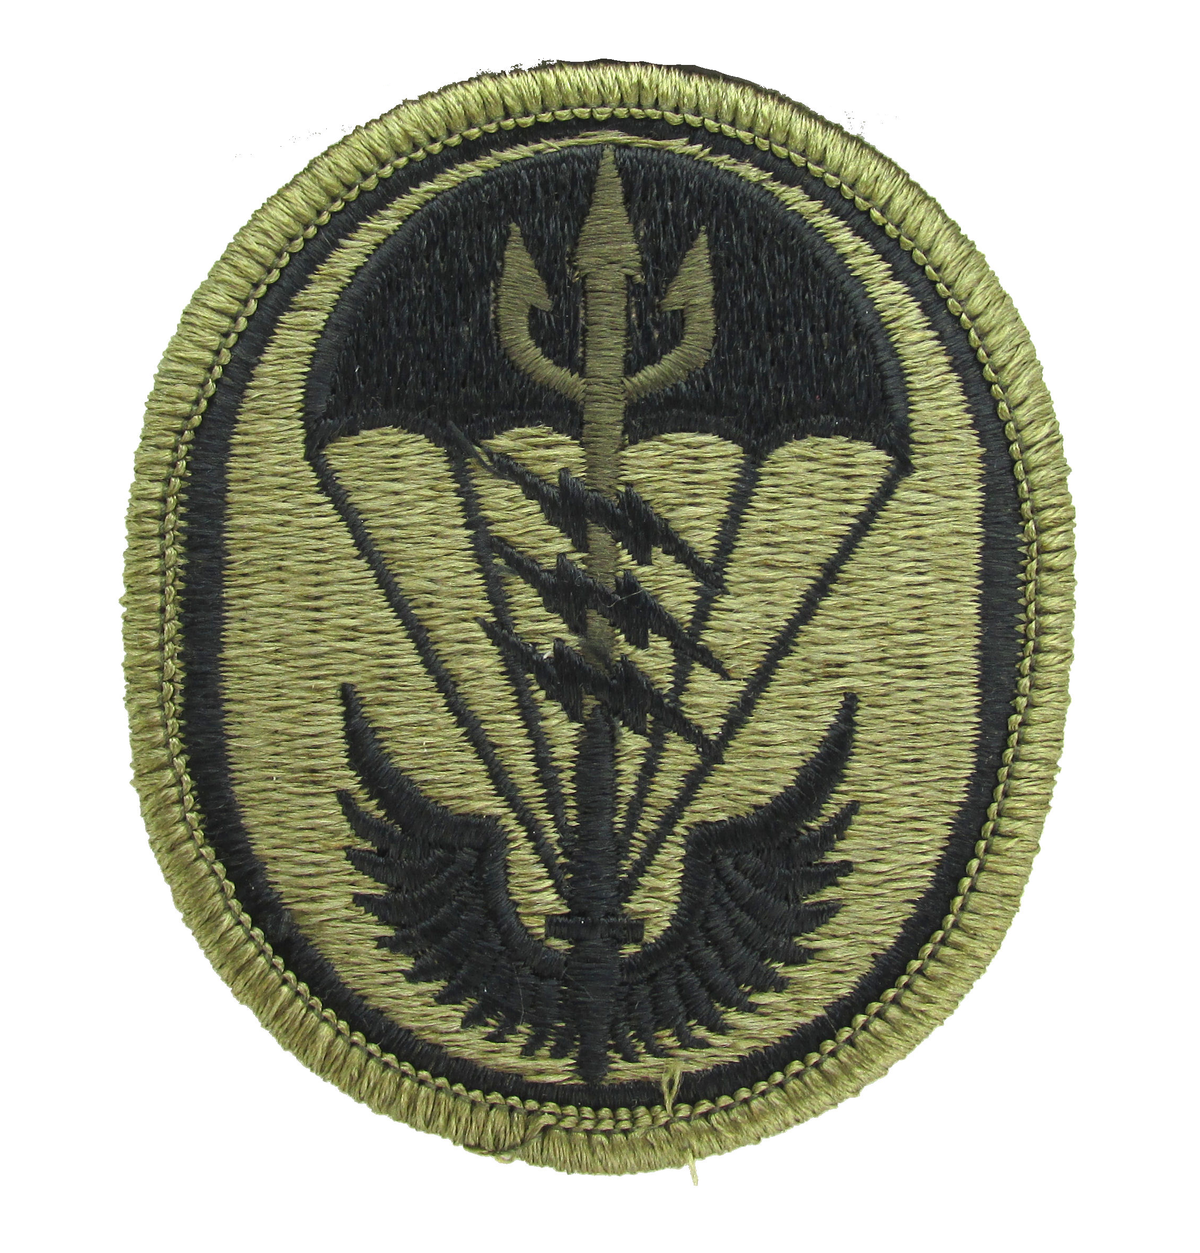 U.S. Army Special Operations Command South OCP Patch